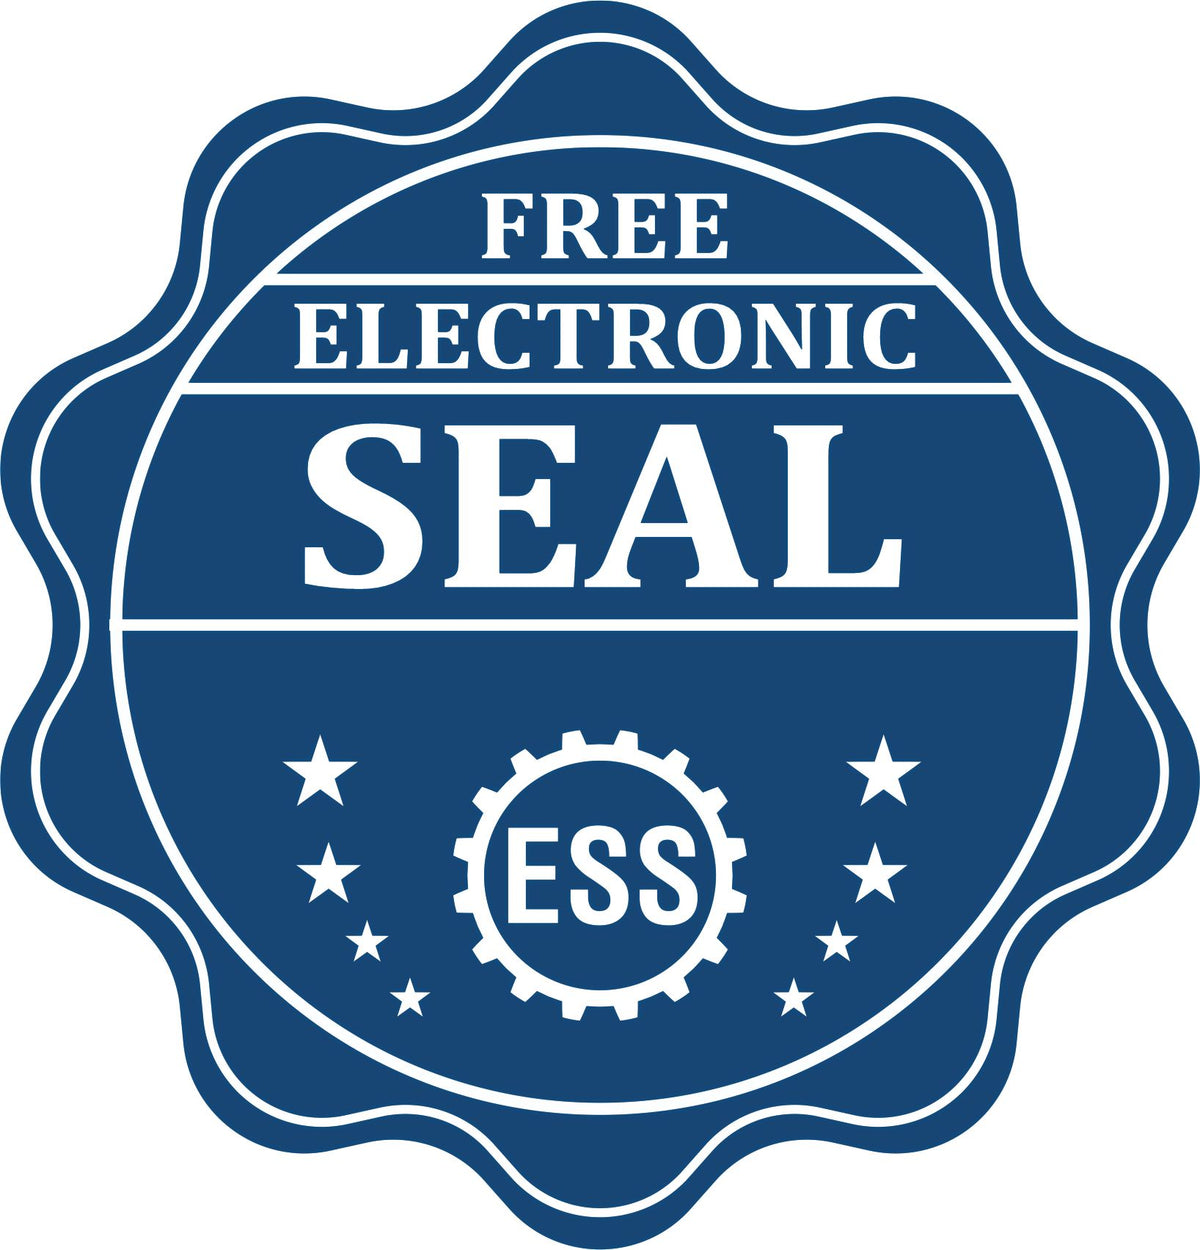 A badge showing a free electronic seal for the Heavy Duty Cast Iron Colorado Architect Embosser with stars and the ESS gear on the emblem.